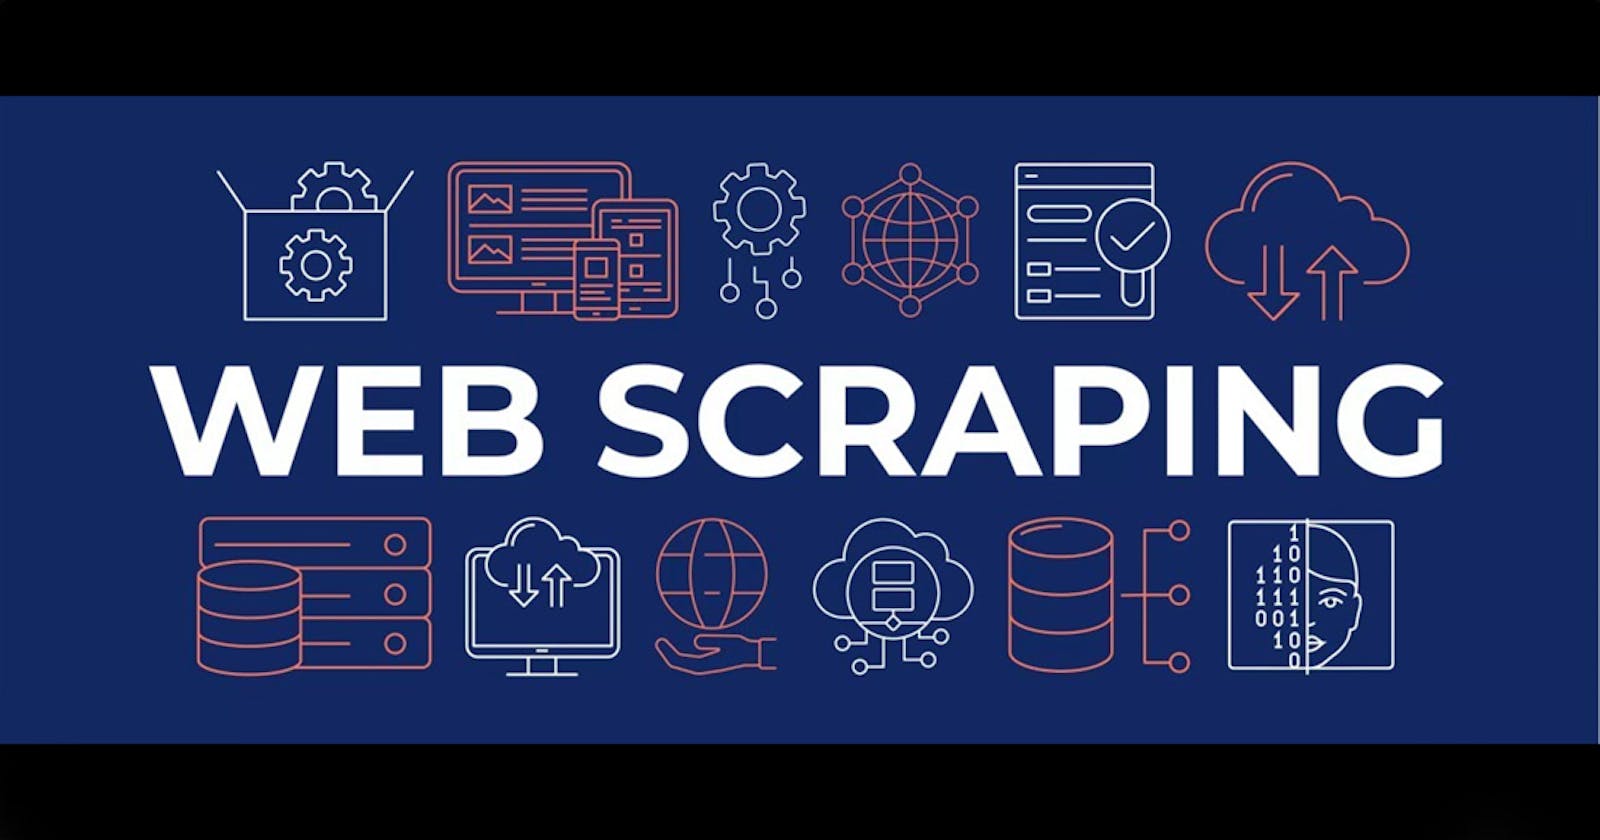 Beautiful Soup or Scrapy or Selenium - Best tool for Python Web scraping?